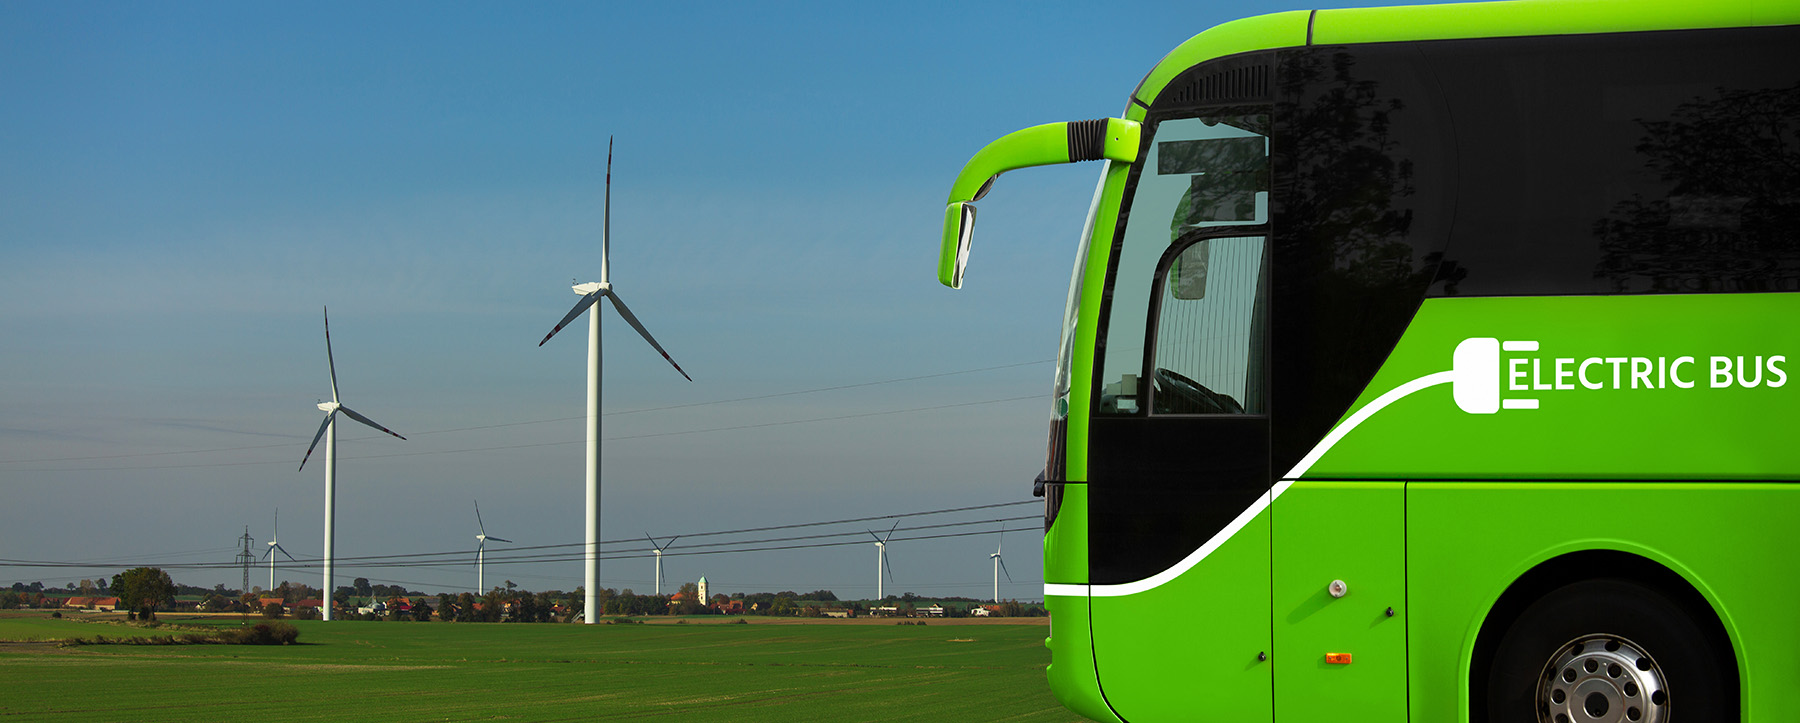 Green bus with white writing on it. in the background are windmills and power lines